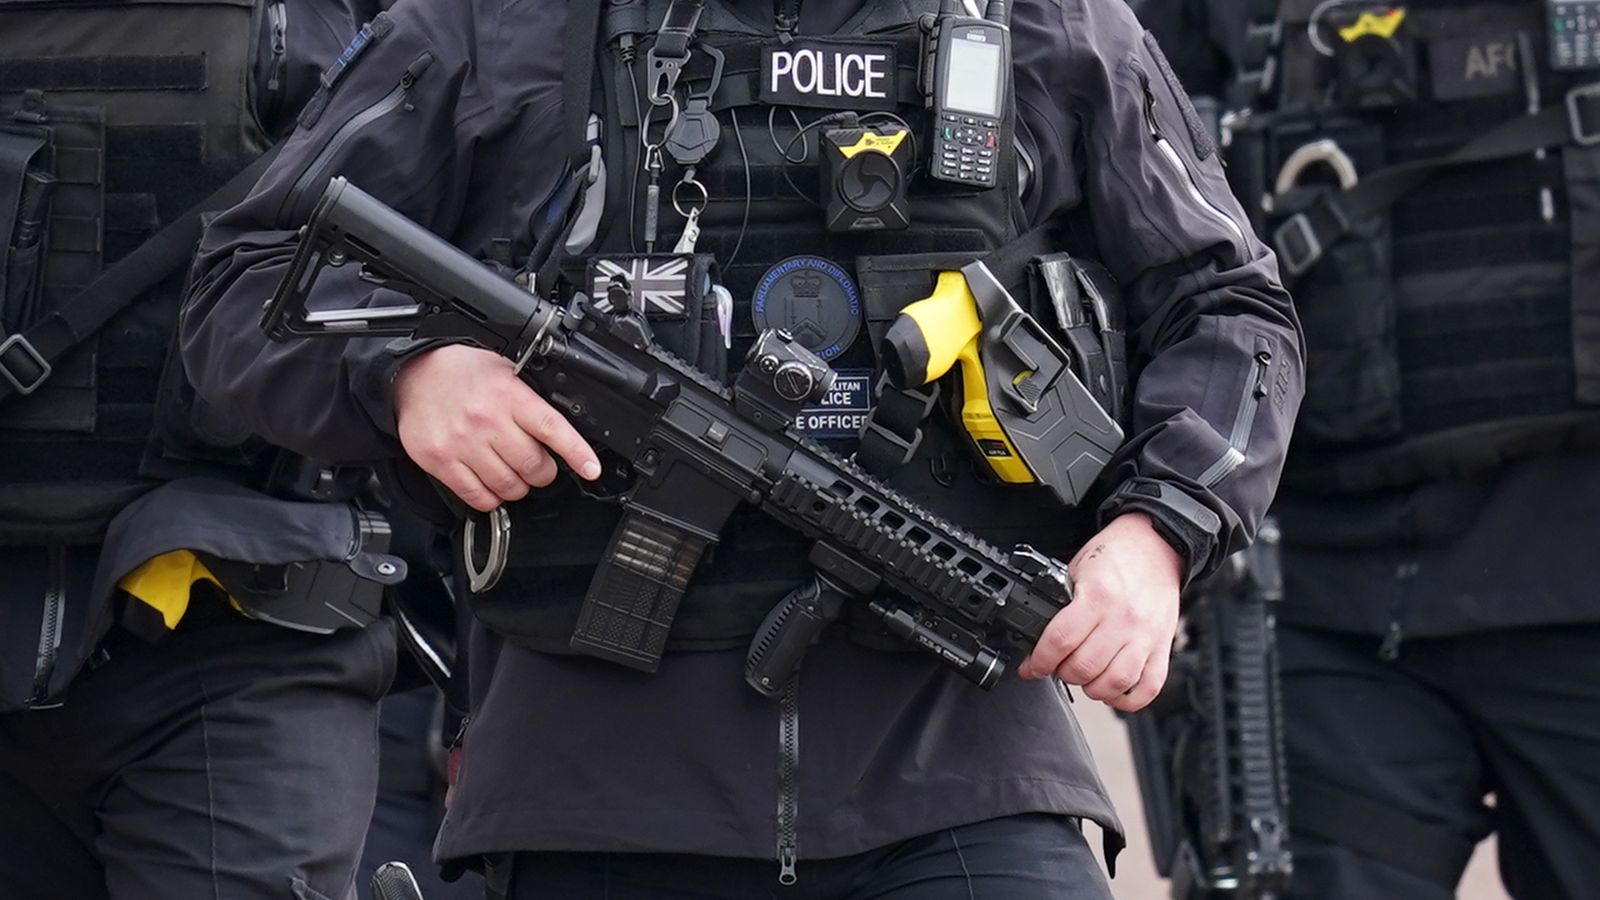 Met firearms officers return to duty - a week after colleague charged with Chris Kaba's murder